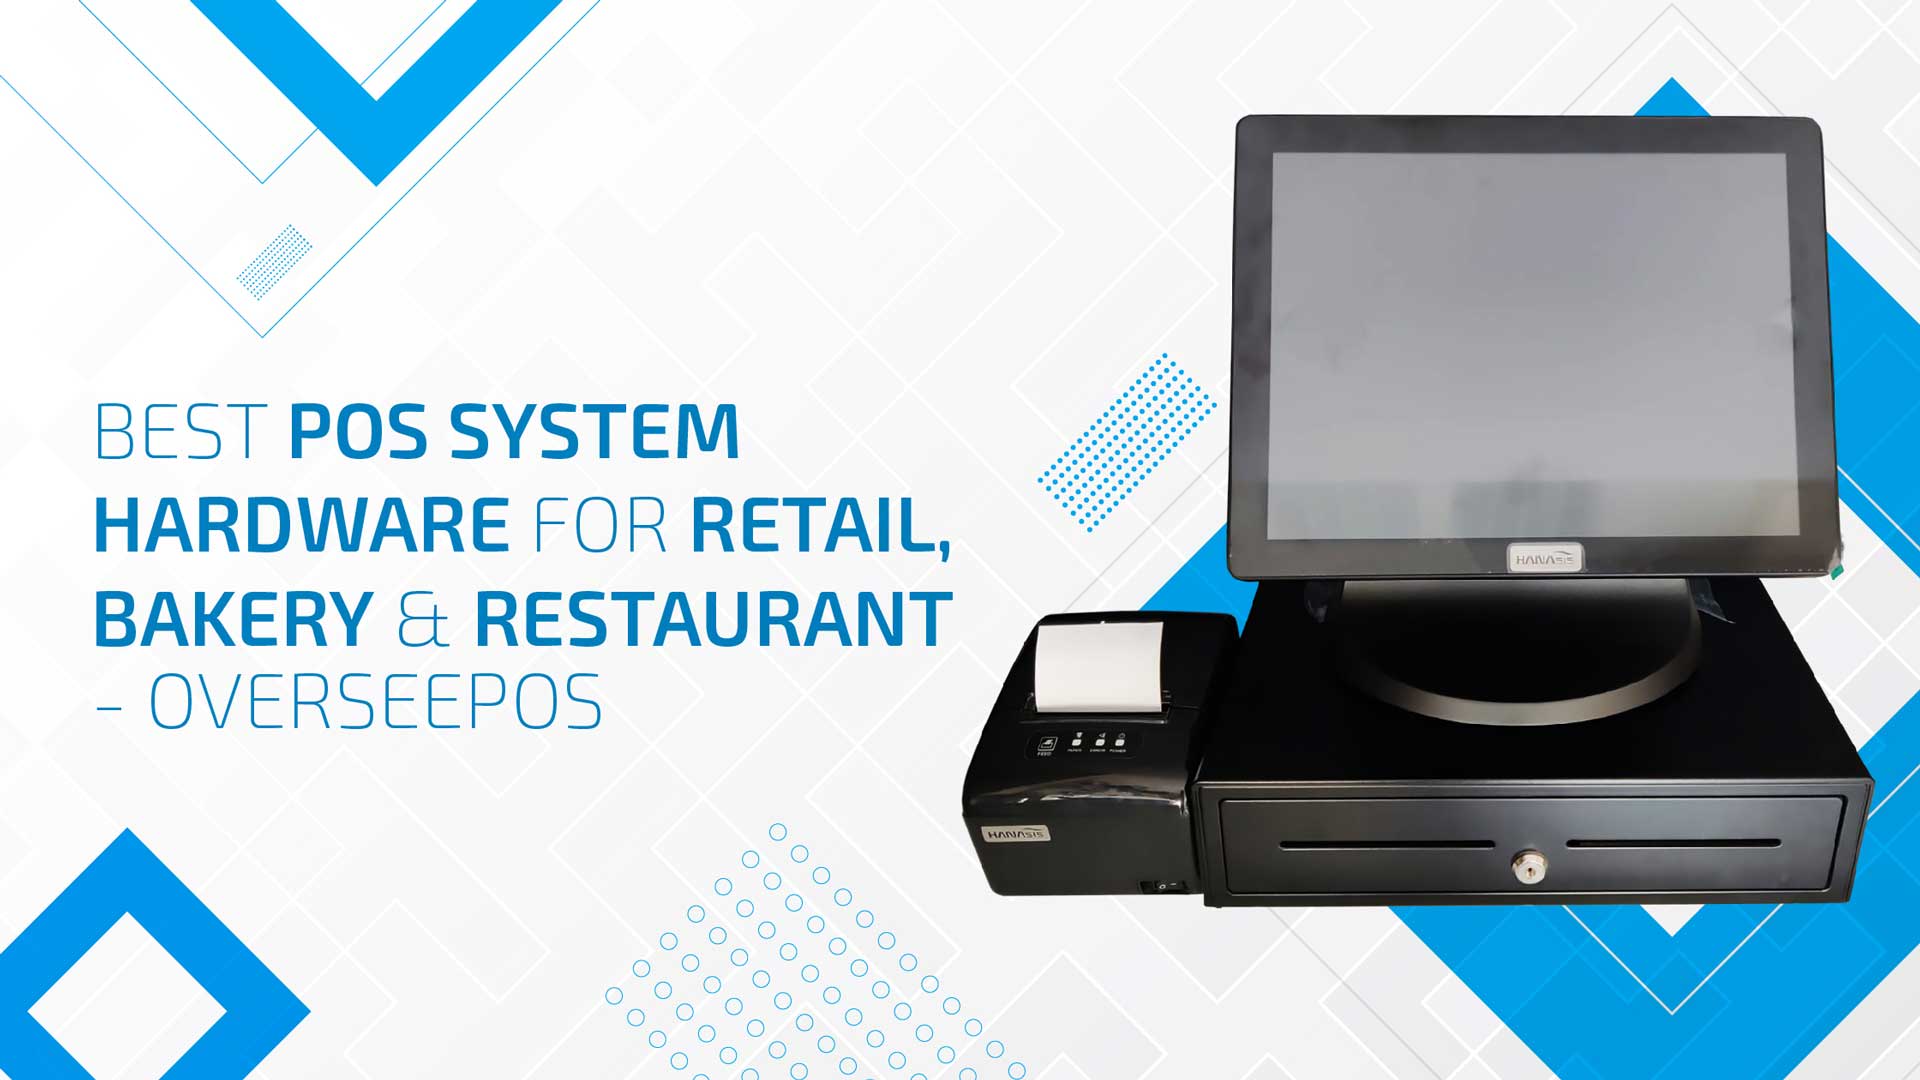 Best POS System Hardware for Retail, Bakery and Restaurant